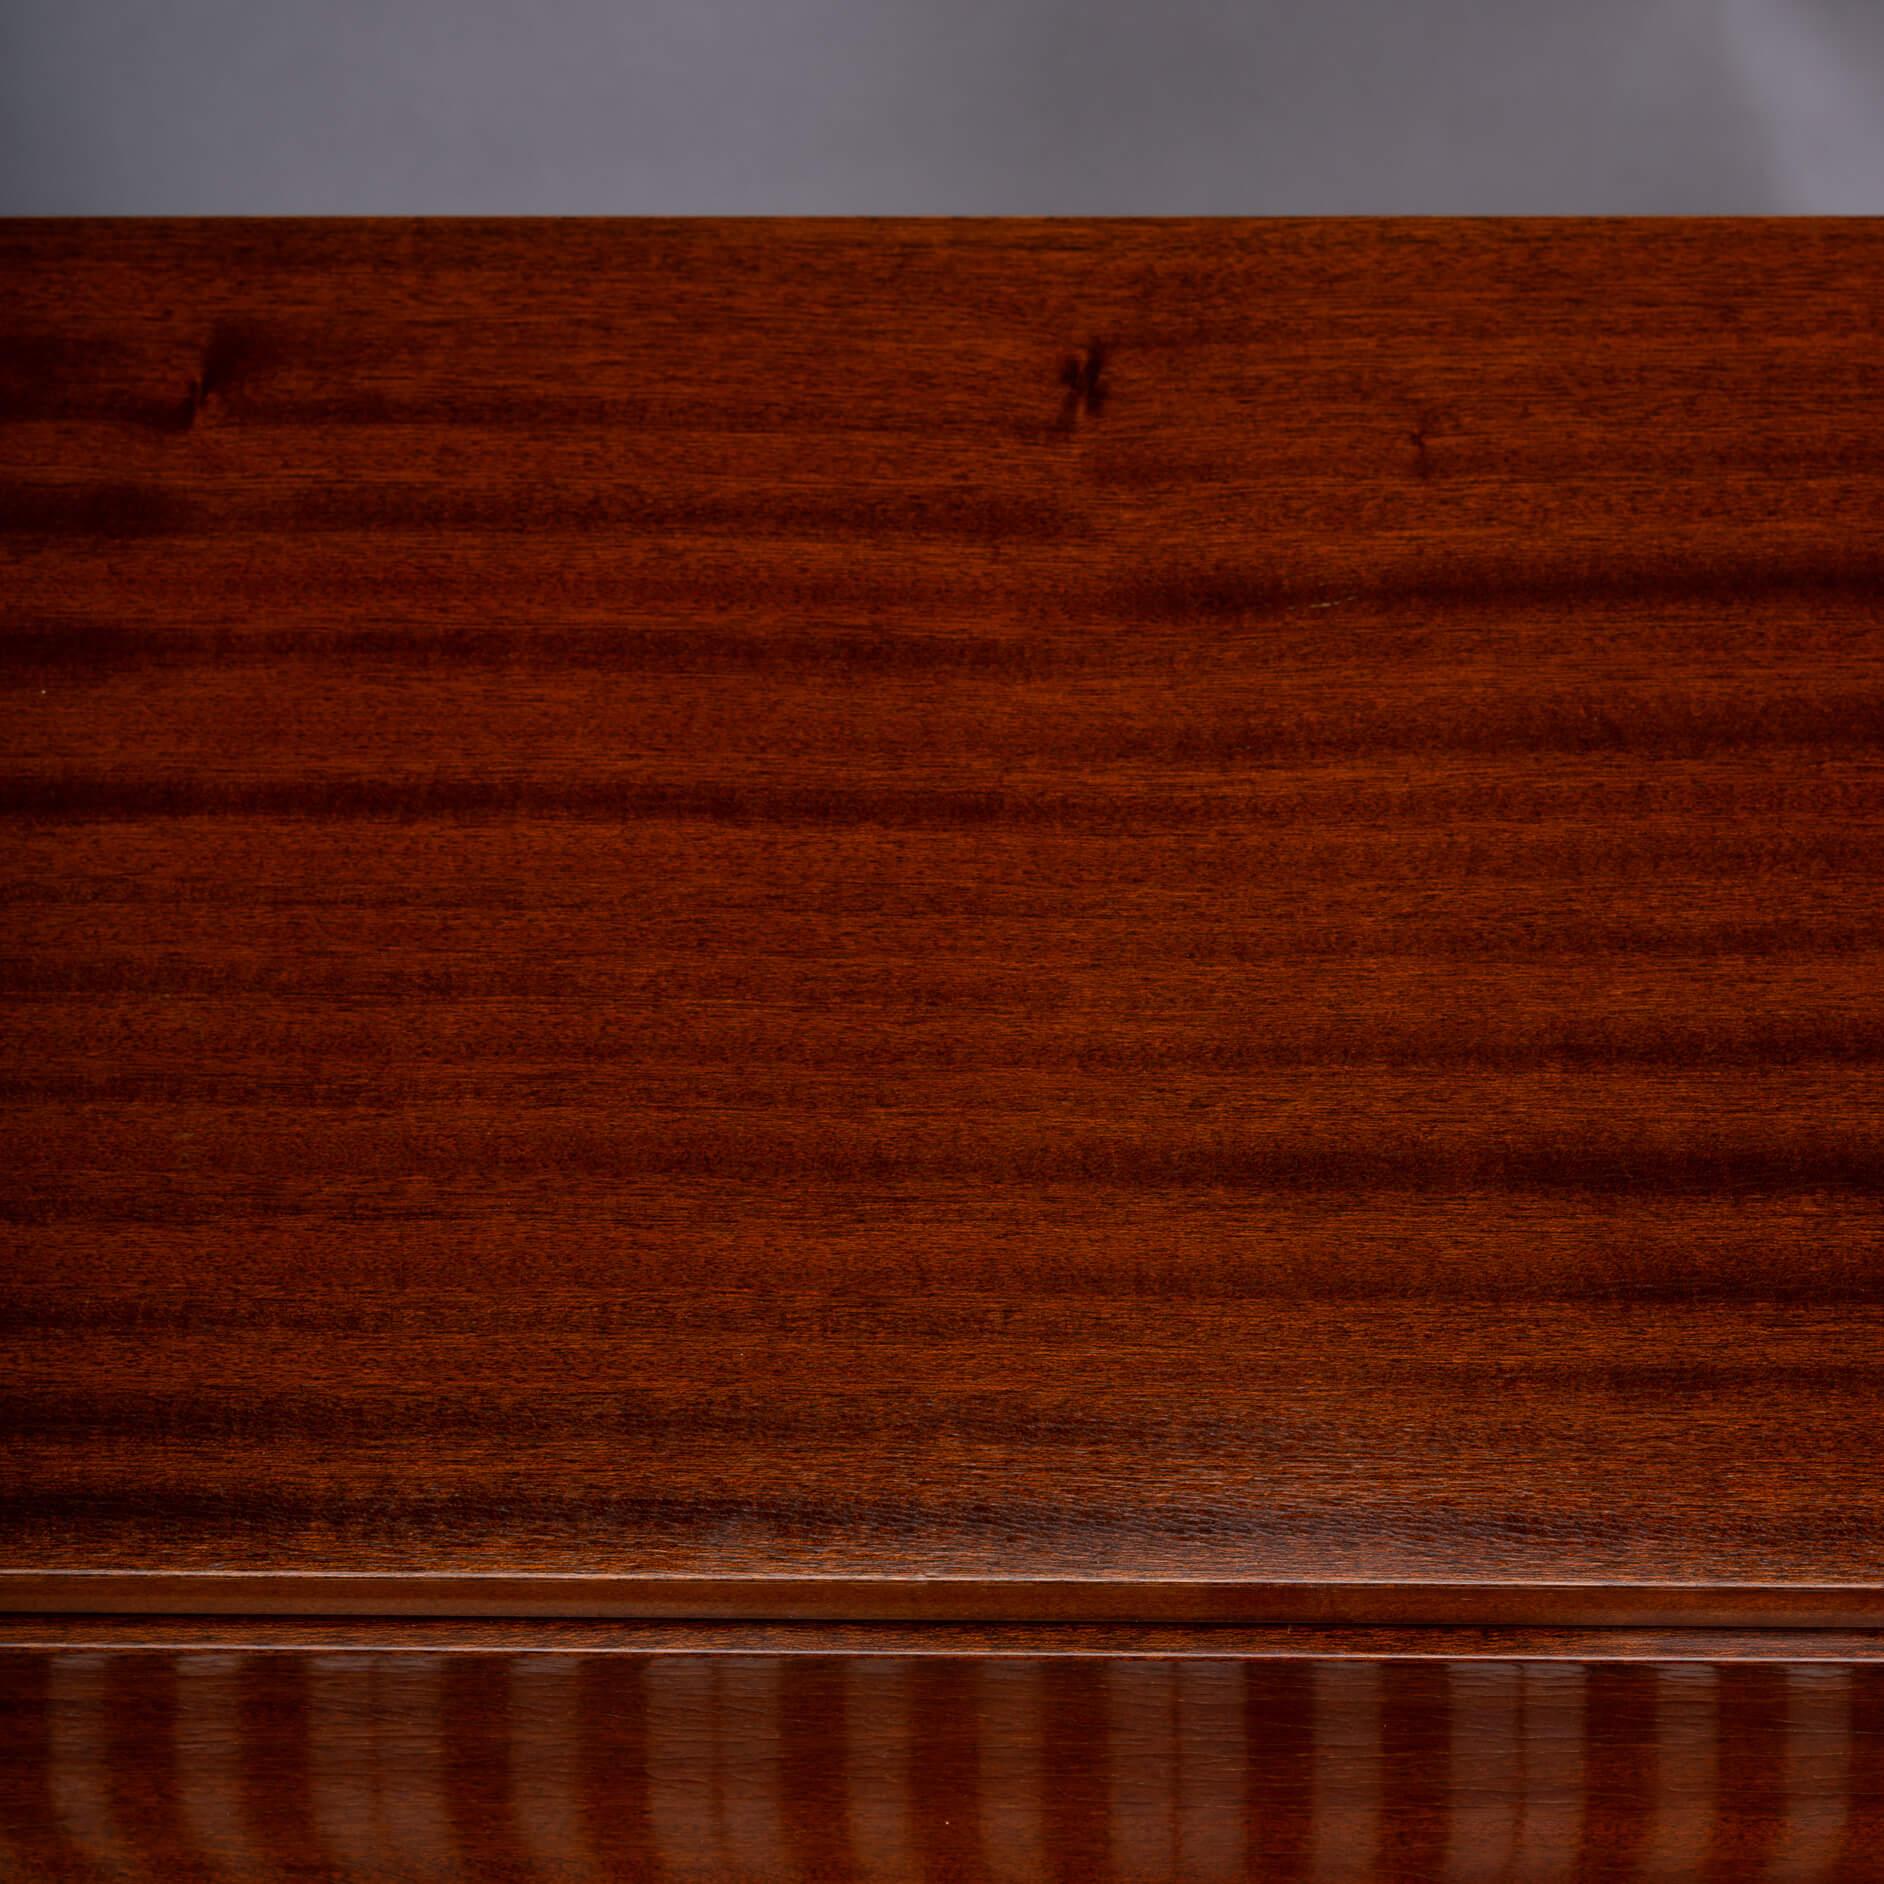 Danish Design Midcentury Pianette by Louis Zwicki in Mahogany, 1950s For Sale 2